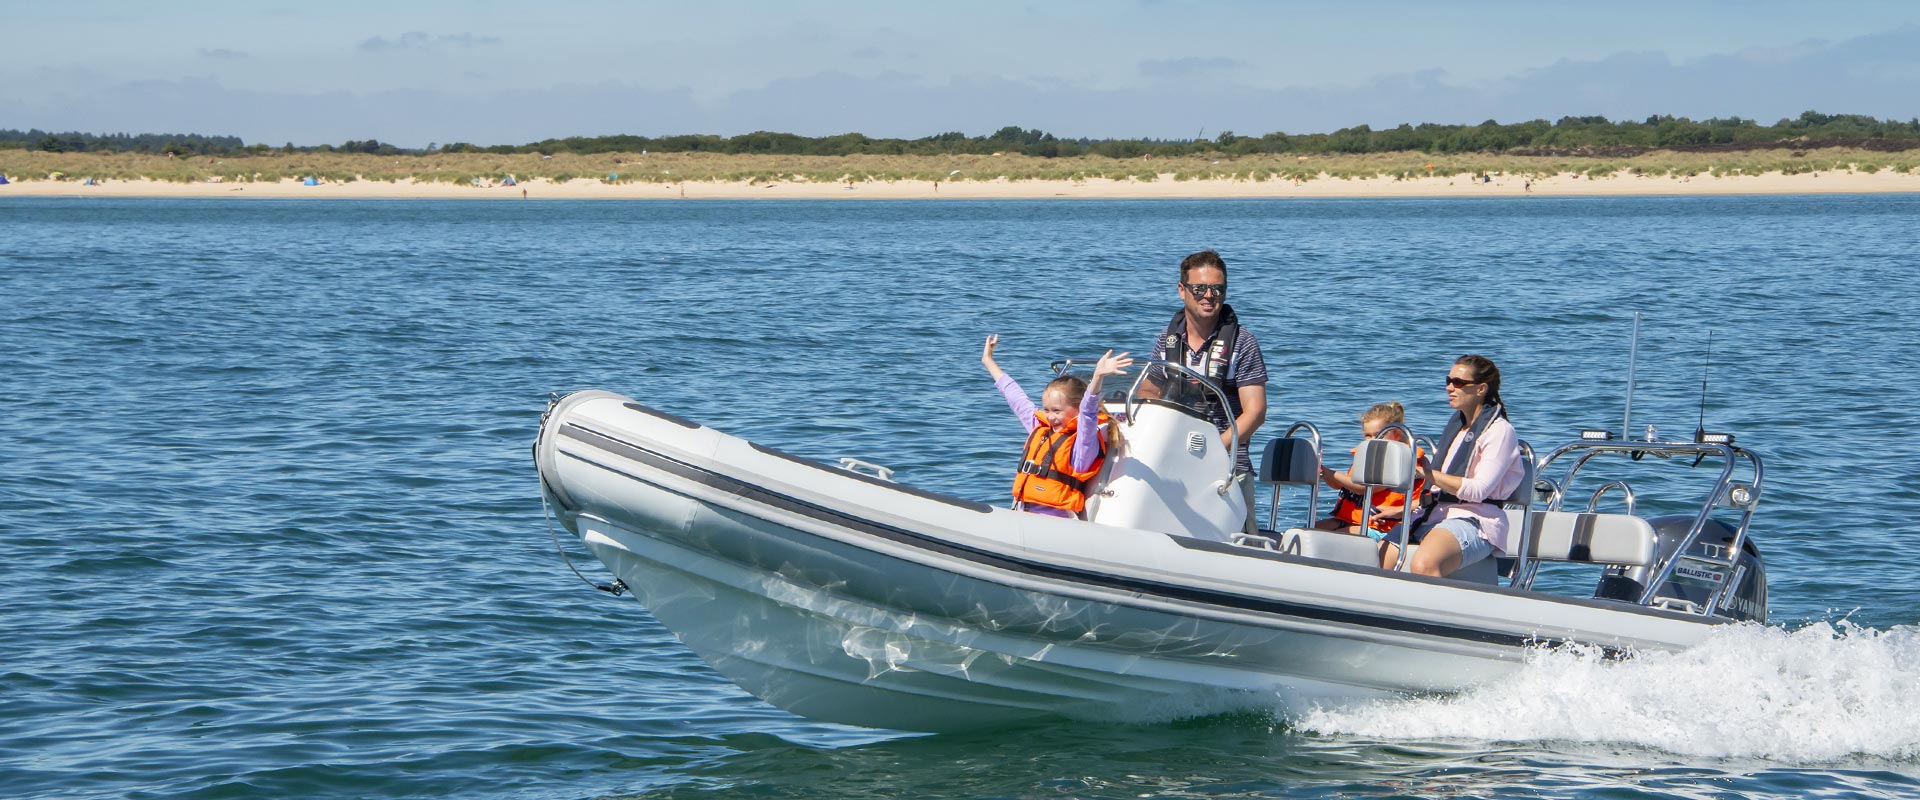 New & Second Hand RIBs & Engines for sale - Family on RIB